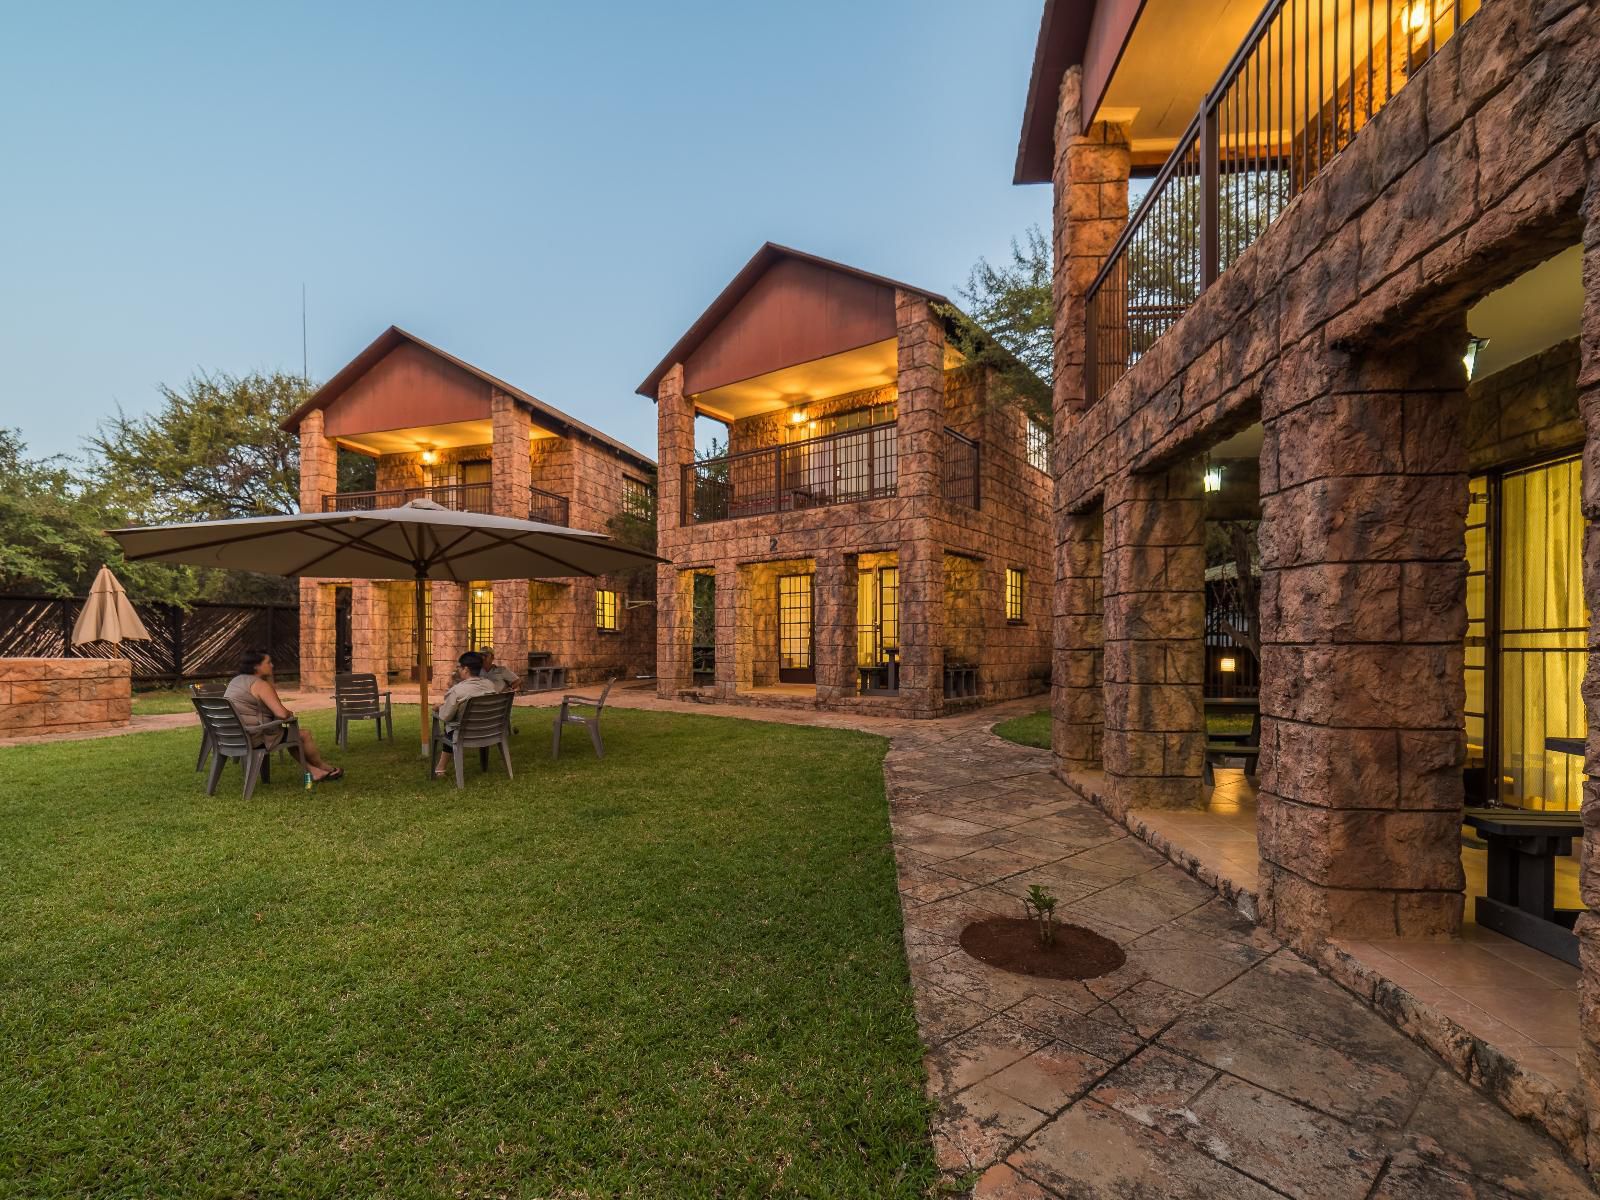 Twalumba Marloth Park Mpumalanga South Africa Complementary Colors, House, Building, Architecture